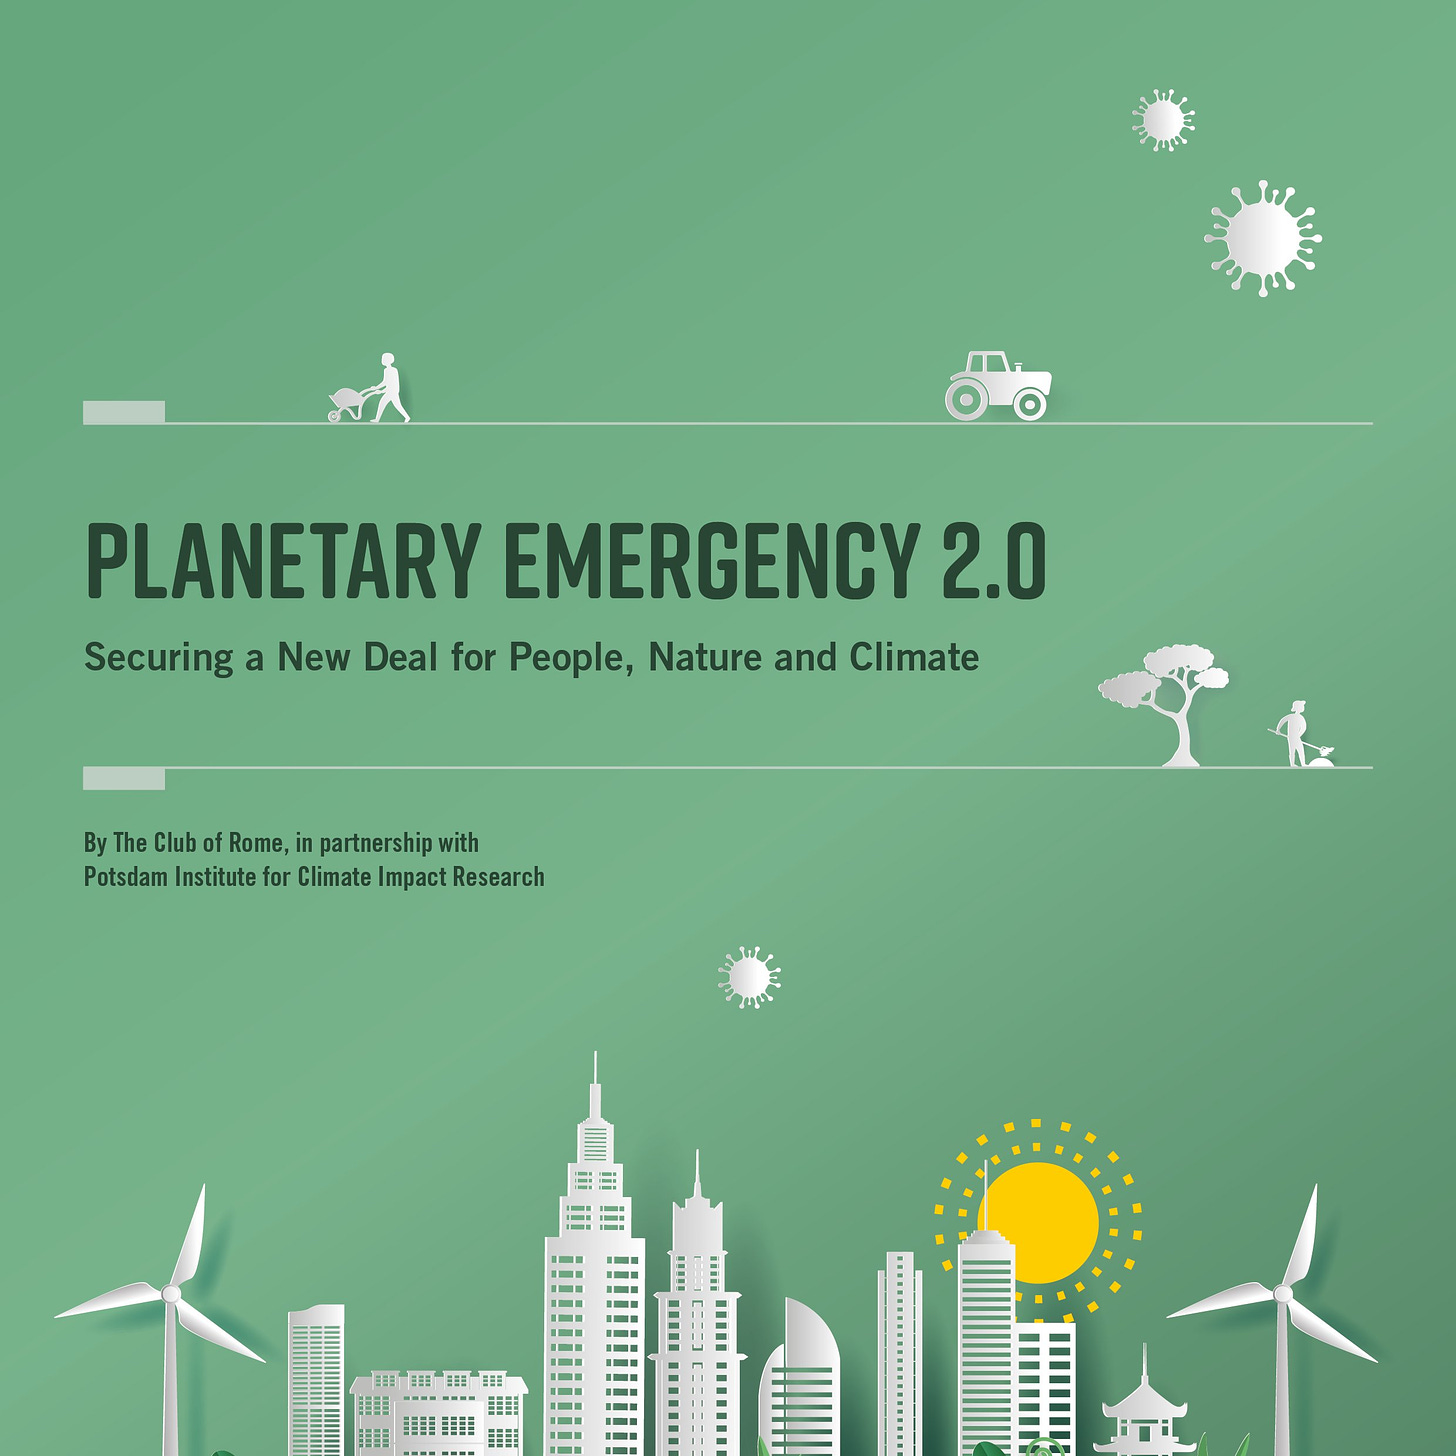 The Club of Rome on X: "The #PlanetaryEmergencyPlan 2.0, updated to include insights from the global pandemic, makes the case that we are unequivocally in the midst of a planetary emergency. COVID-19